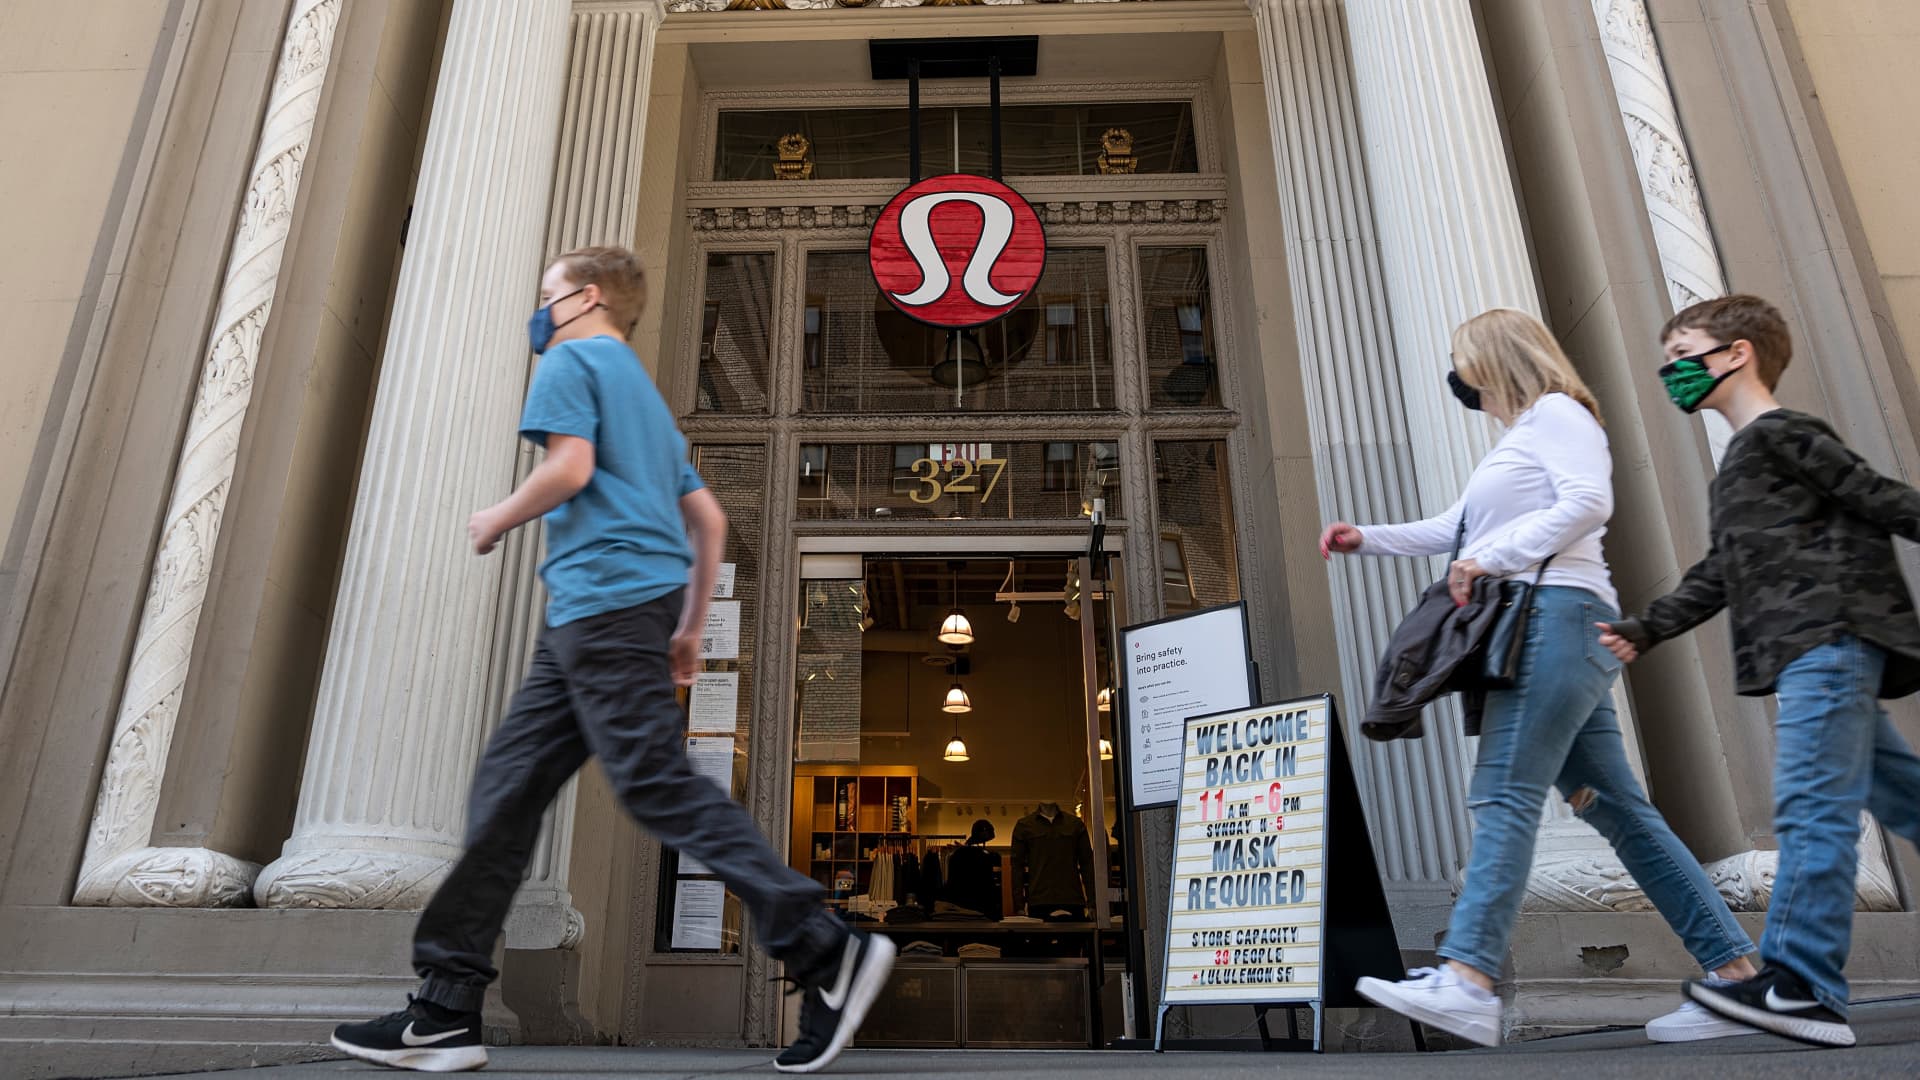 Stocks making the biggest moves after hours: Lululemon, Costco and more